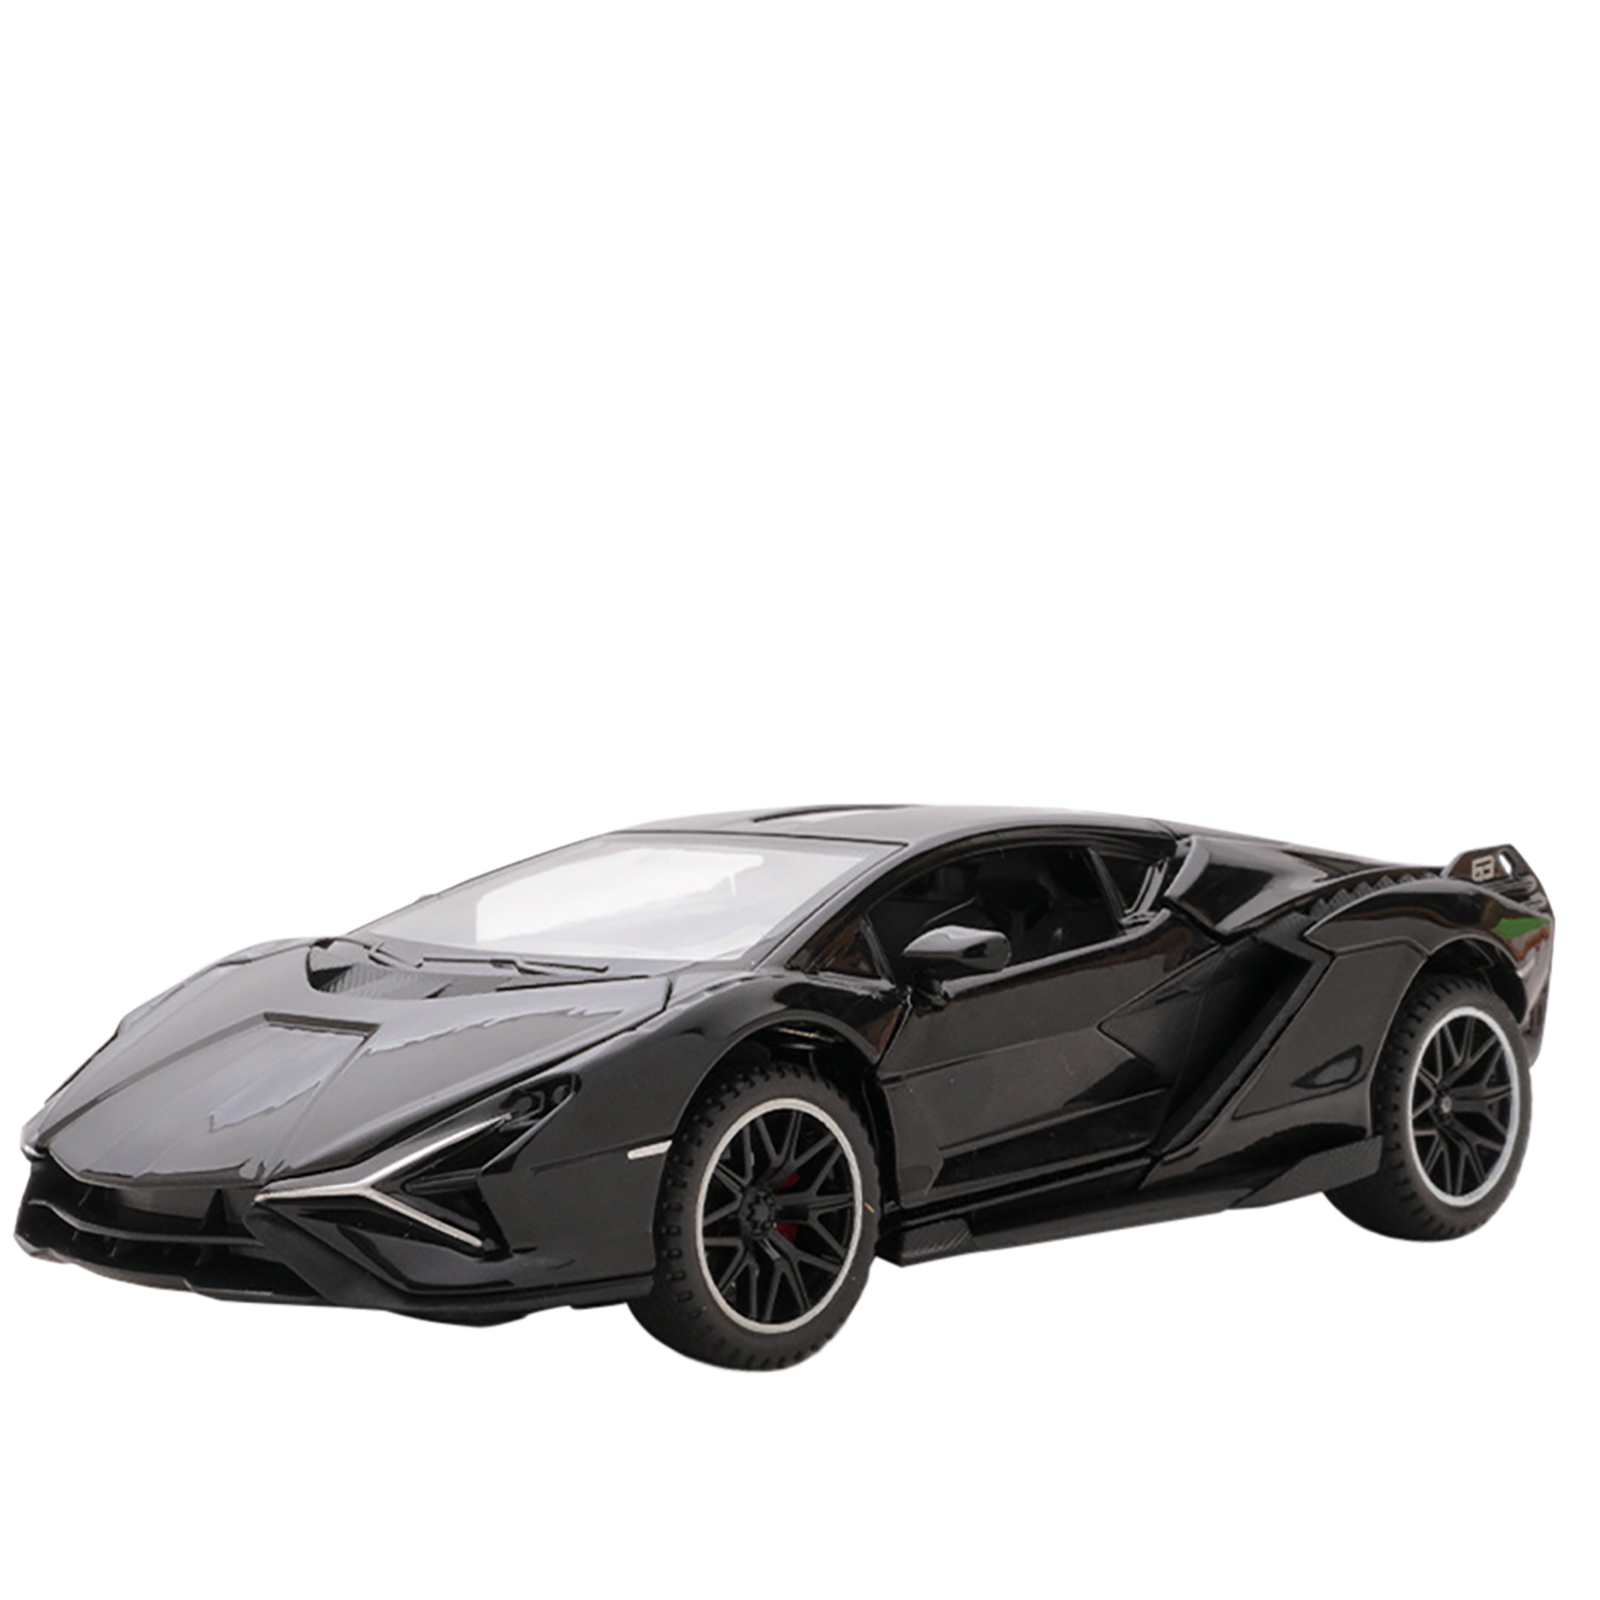 1/32 Alloy Sports Car Model Ornaments Simulation 4-door Openable Diecast Vehicle With Sound Light For Boys Gifts Collection